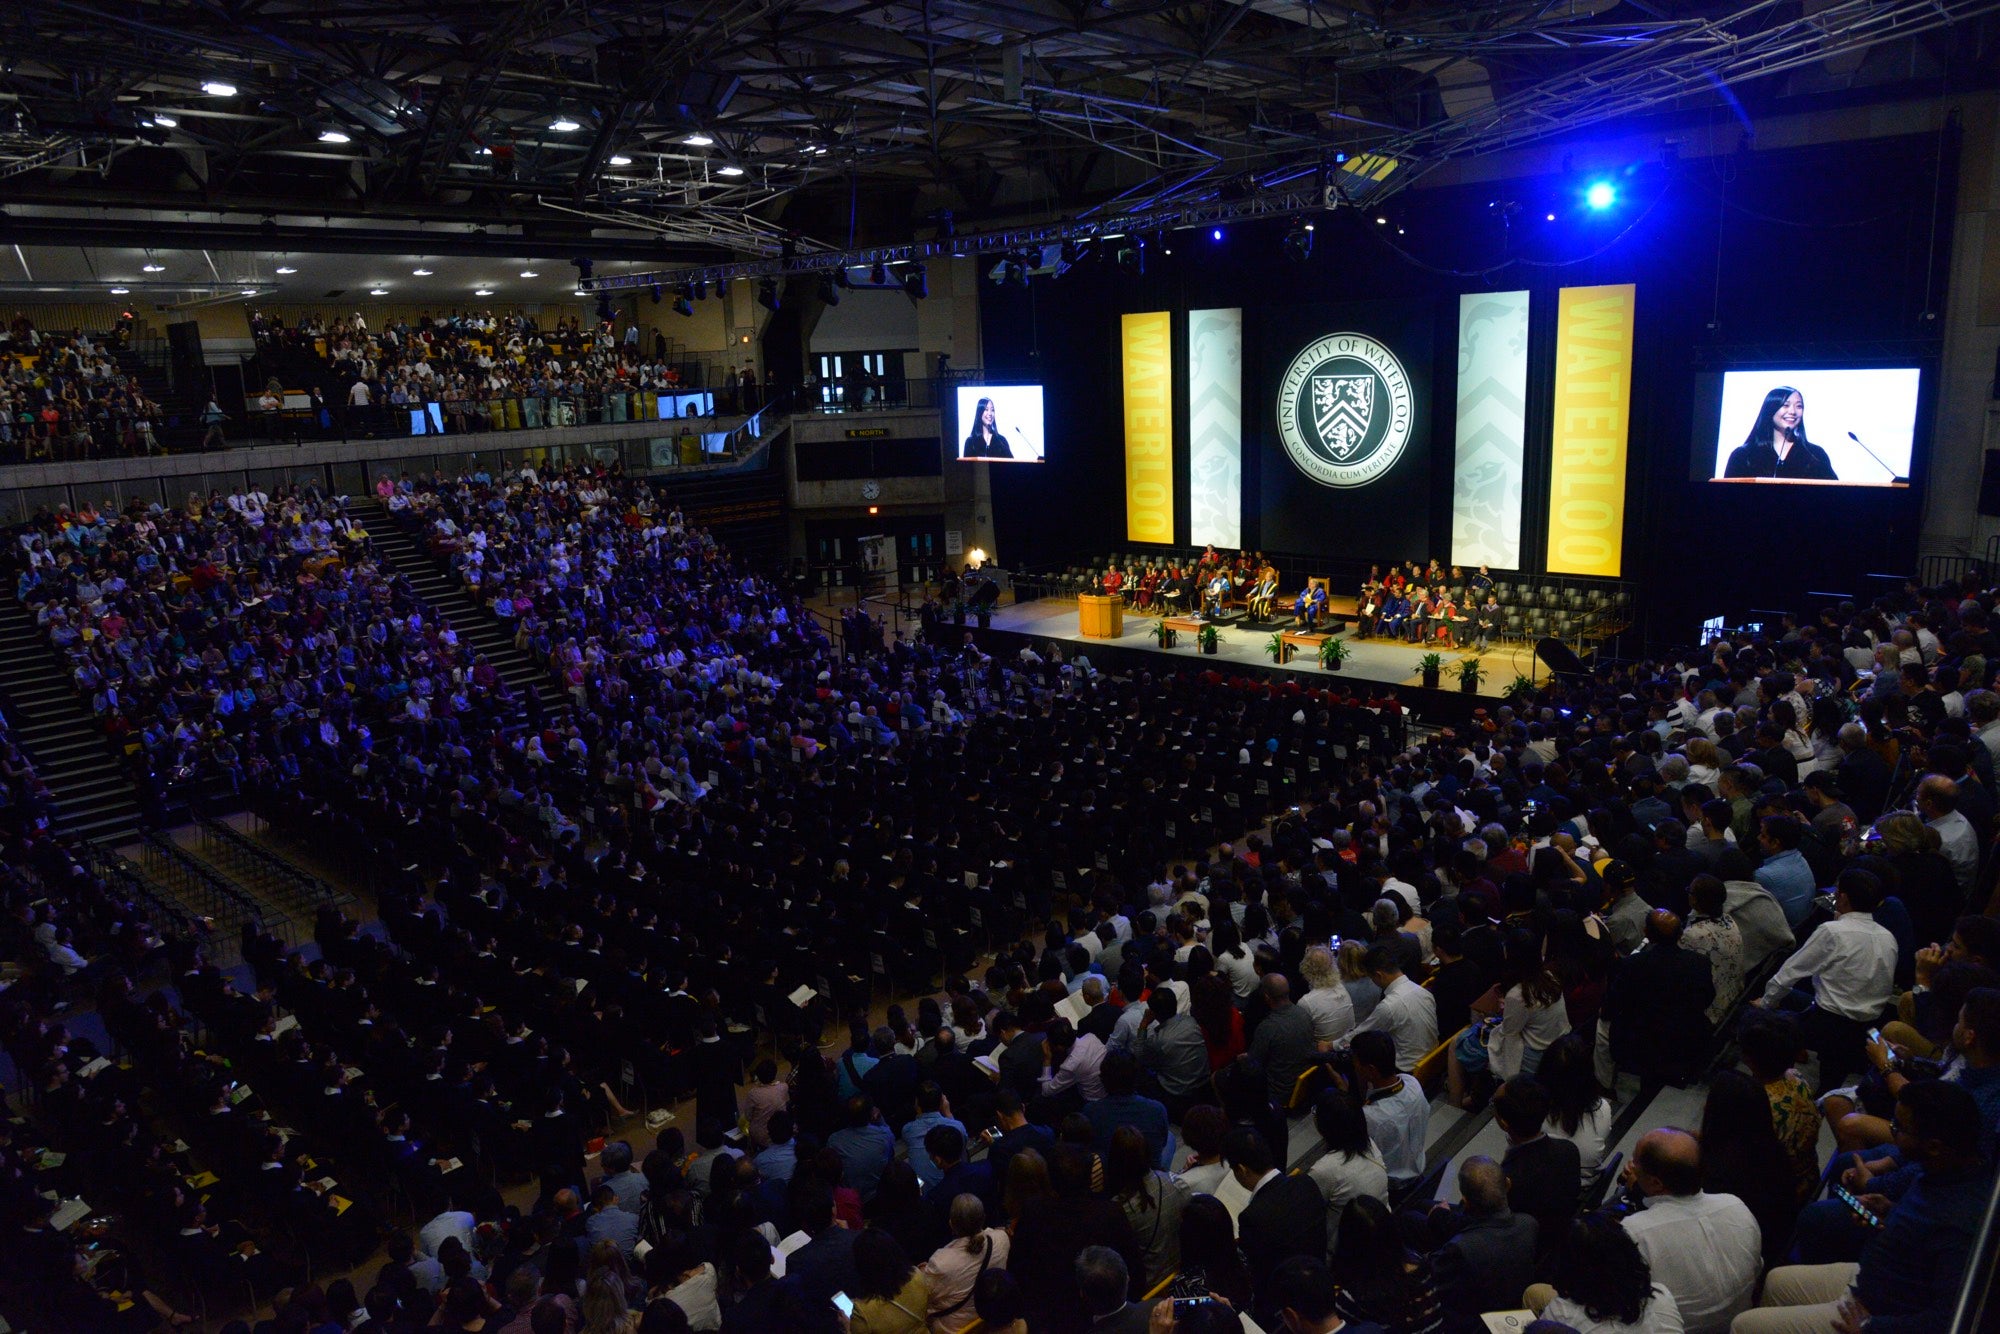 Students and supporters fill the hall at Convocation